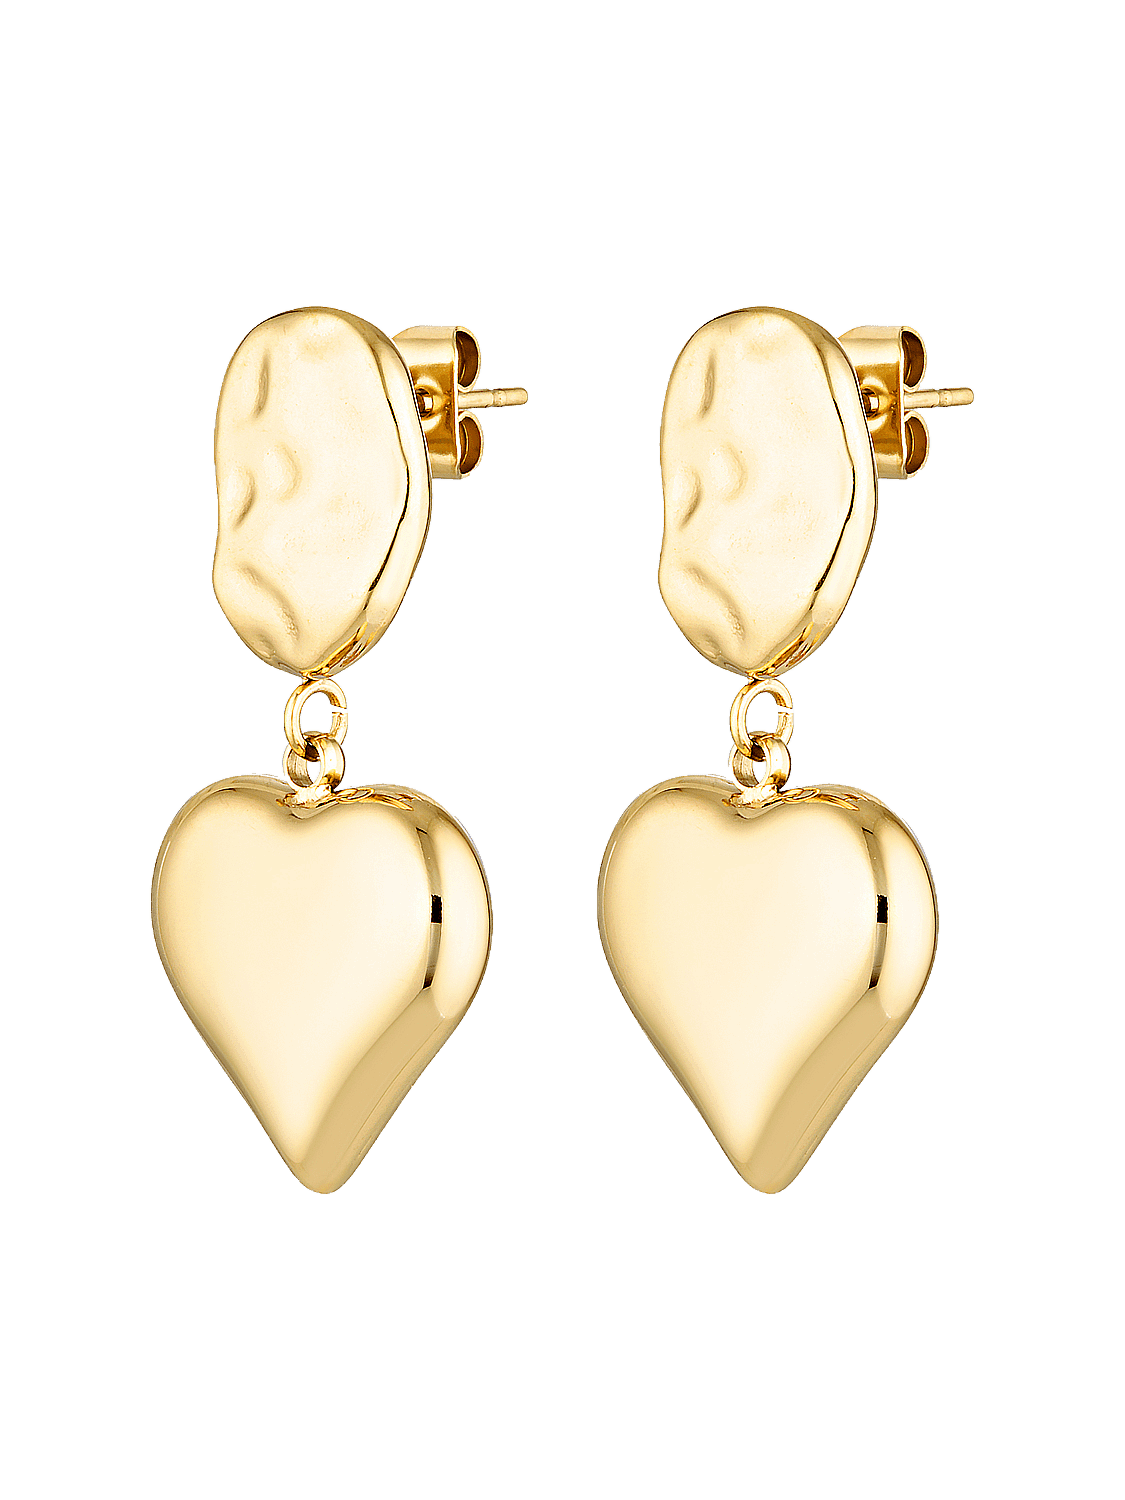 gold filled earrings from Bixby and Co